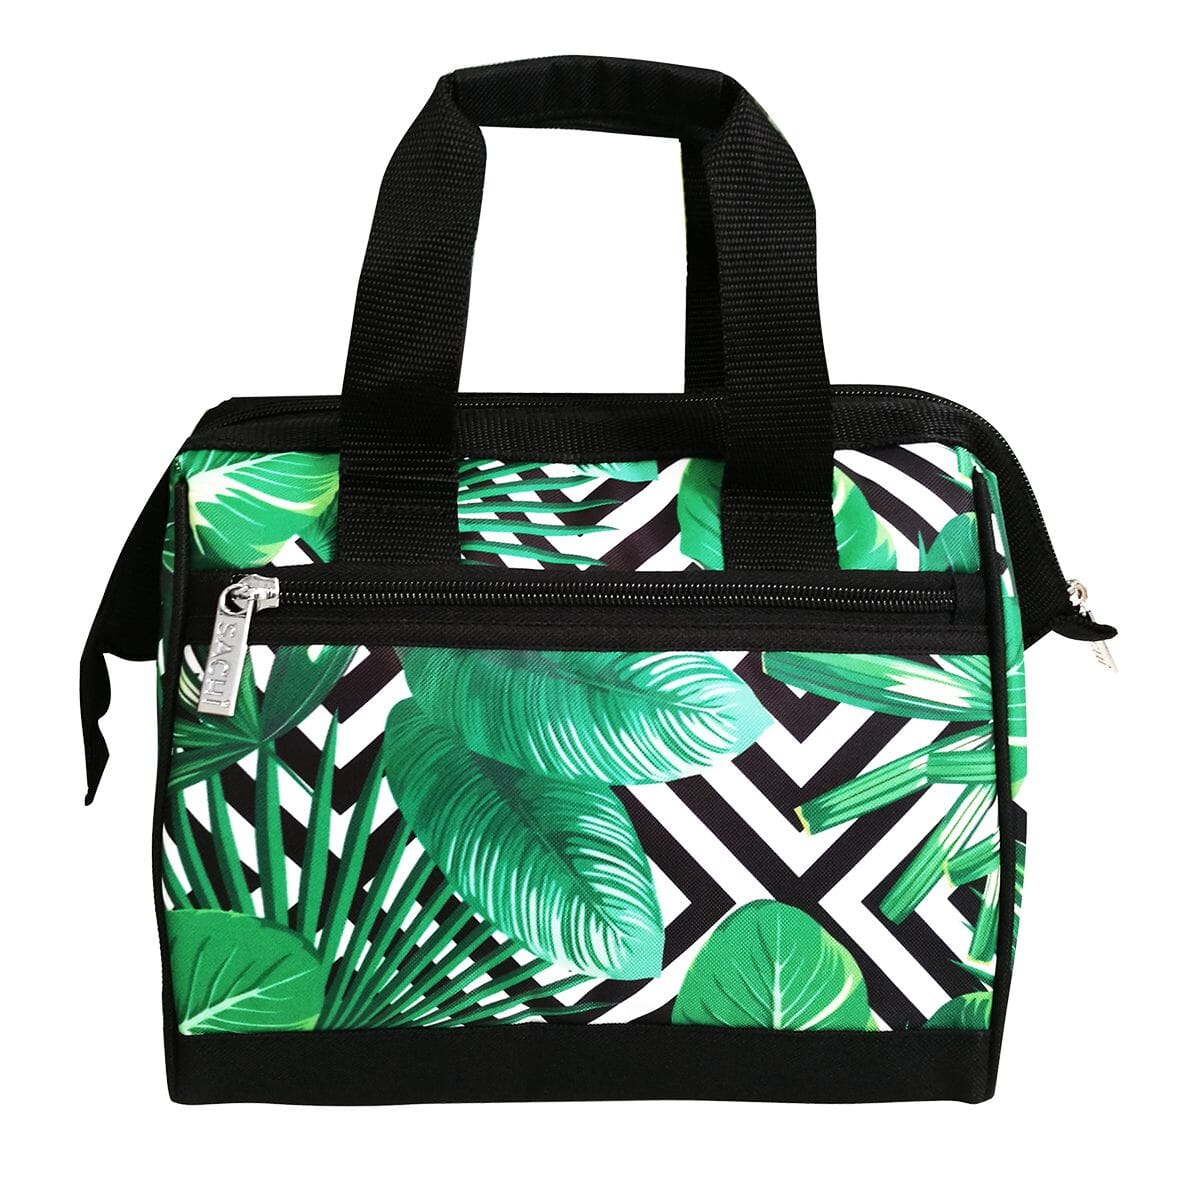 Insulated Lunch Bag - Palm Springs Sachi 